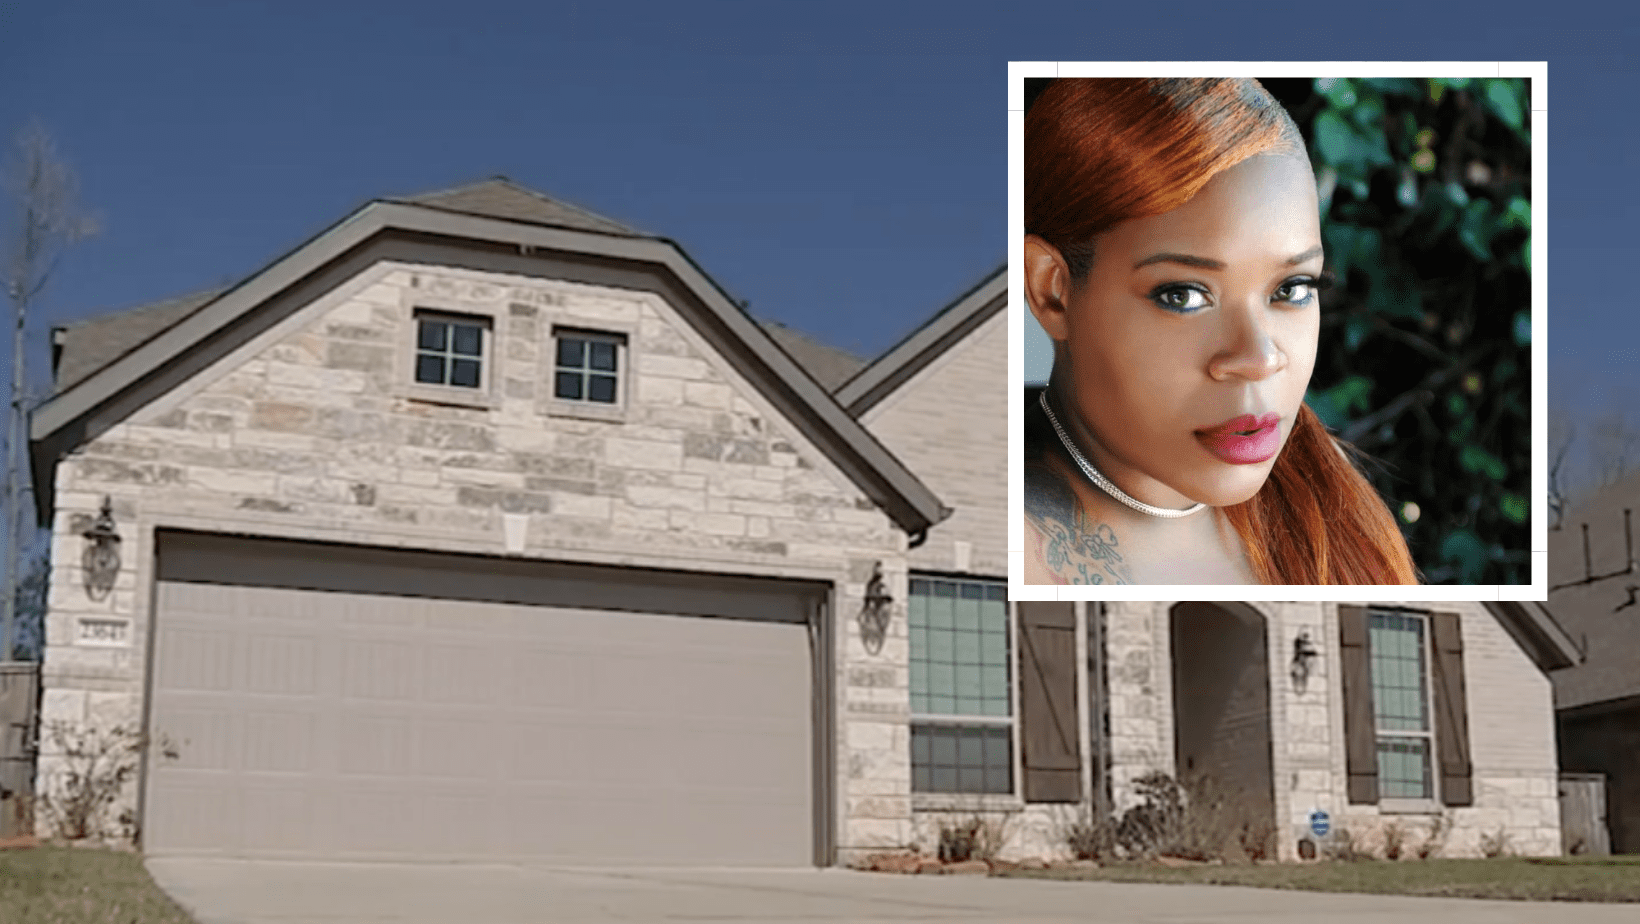 Texas Mother Disturbingly Abandons Two Young Children Home Alone for 2 Months